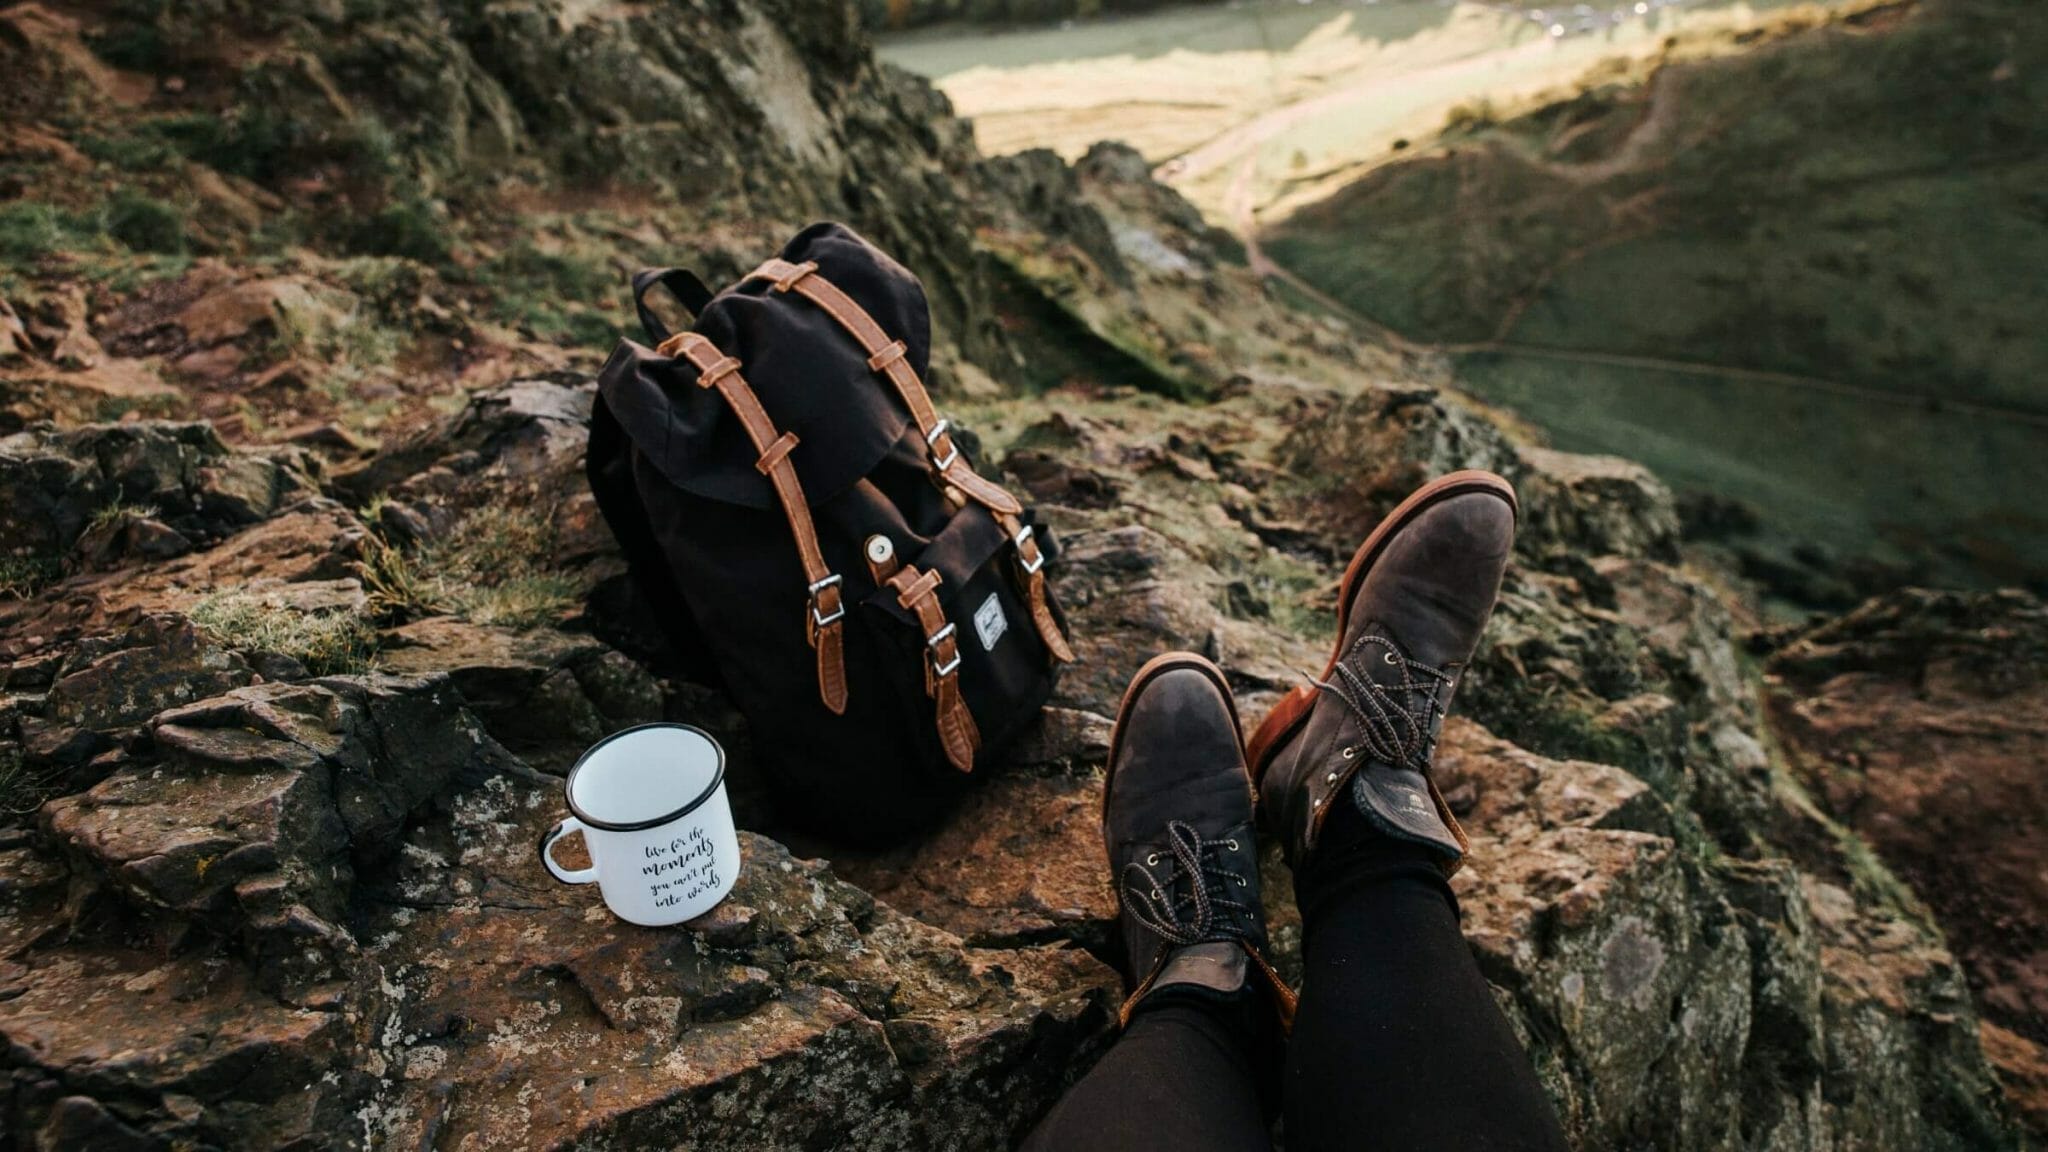 Unlaced hiking boots propped on rocks with tin camping coffee mug and strapped hiking pack.